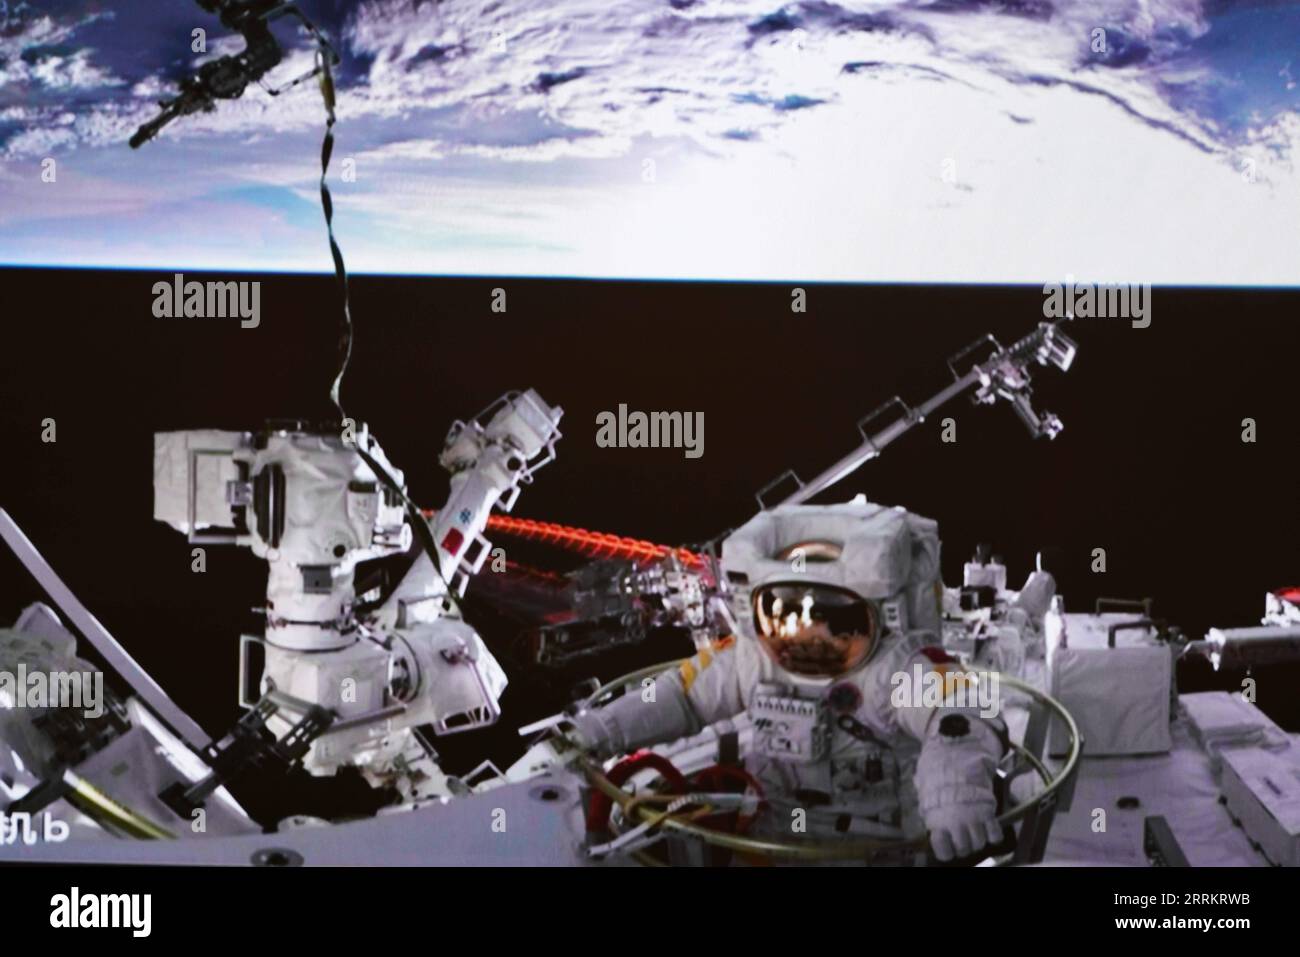 220917 -- BEIJING, Sept. 17, 2022 -- Screen image captured at Beijing Aerospace Control Center on Sept. 17, 2022 shows Shenzhou-14 astronaut Cai Xuzhe exiting the space station lab module Wentian to conduct extravehicular activities EVAs. China s Shenzhou-14 astronauts Cai Xuzhe and Chen Dong successfully exited the space station lab module Wentian on Saturday to conduct EVAs, according to the China Manned Space Agency CMSA.  EyesonSciCHINA-WENTIAN-SHENZHOU-14 ASTRONAUTS-EXTRAVEHICULAR ACTIVITIES CN GuoxZhongzheng PUBLICATIONxNOTxINxCHN Stock Photo